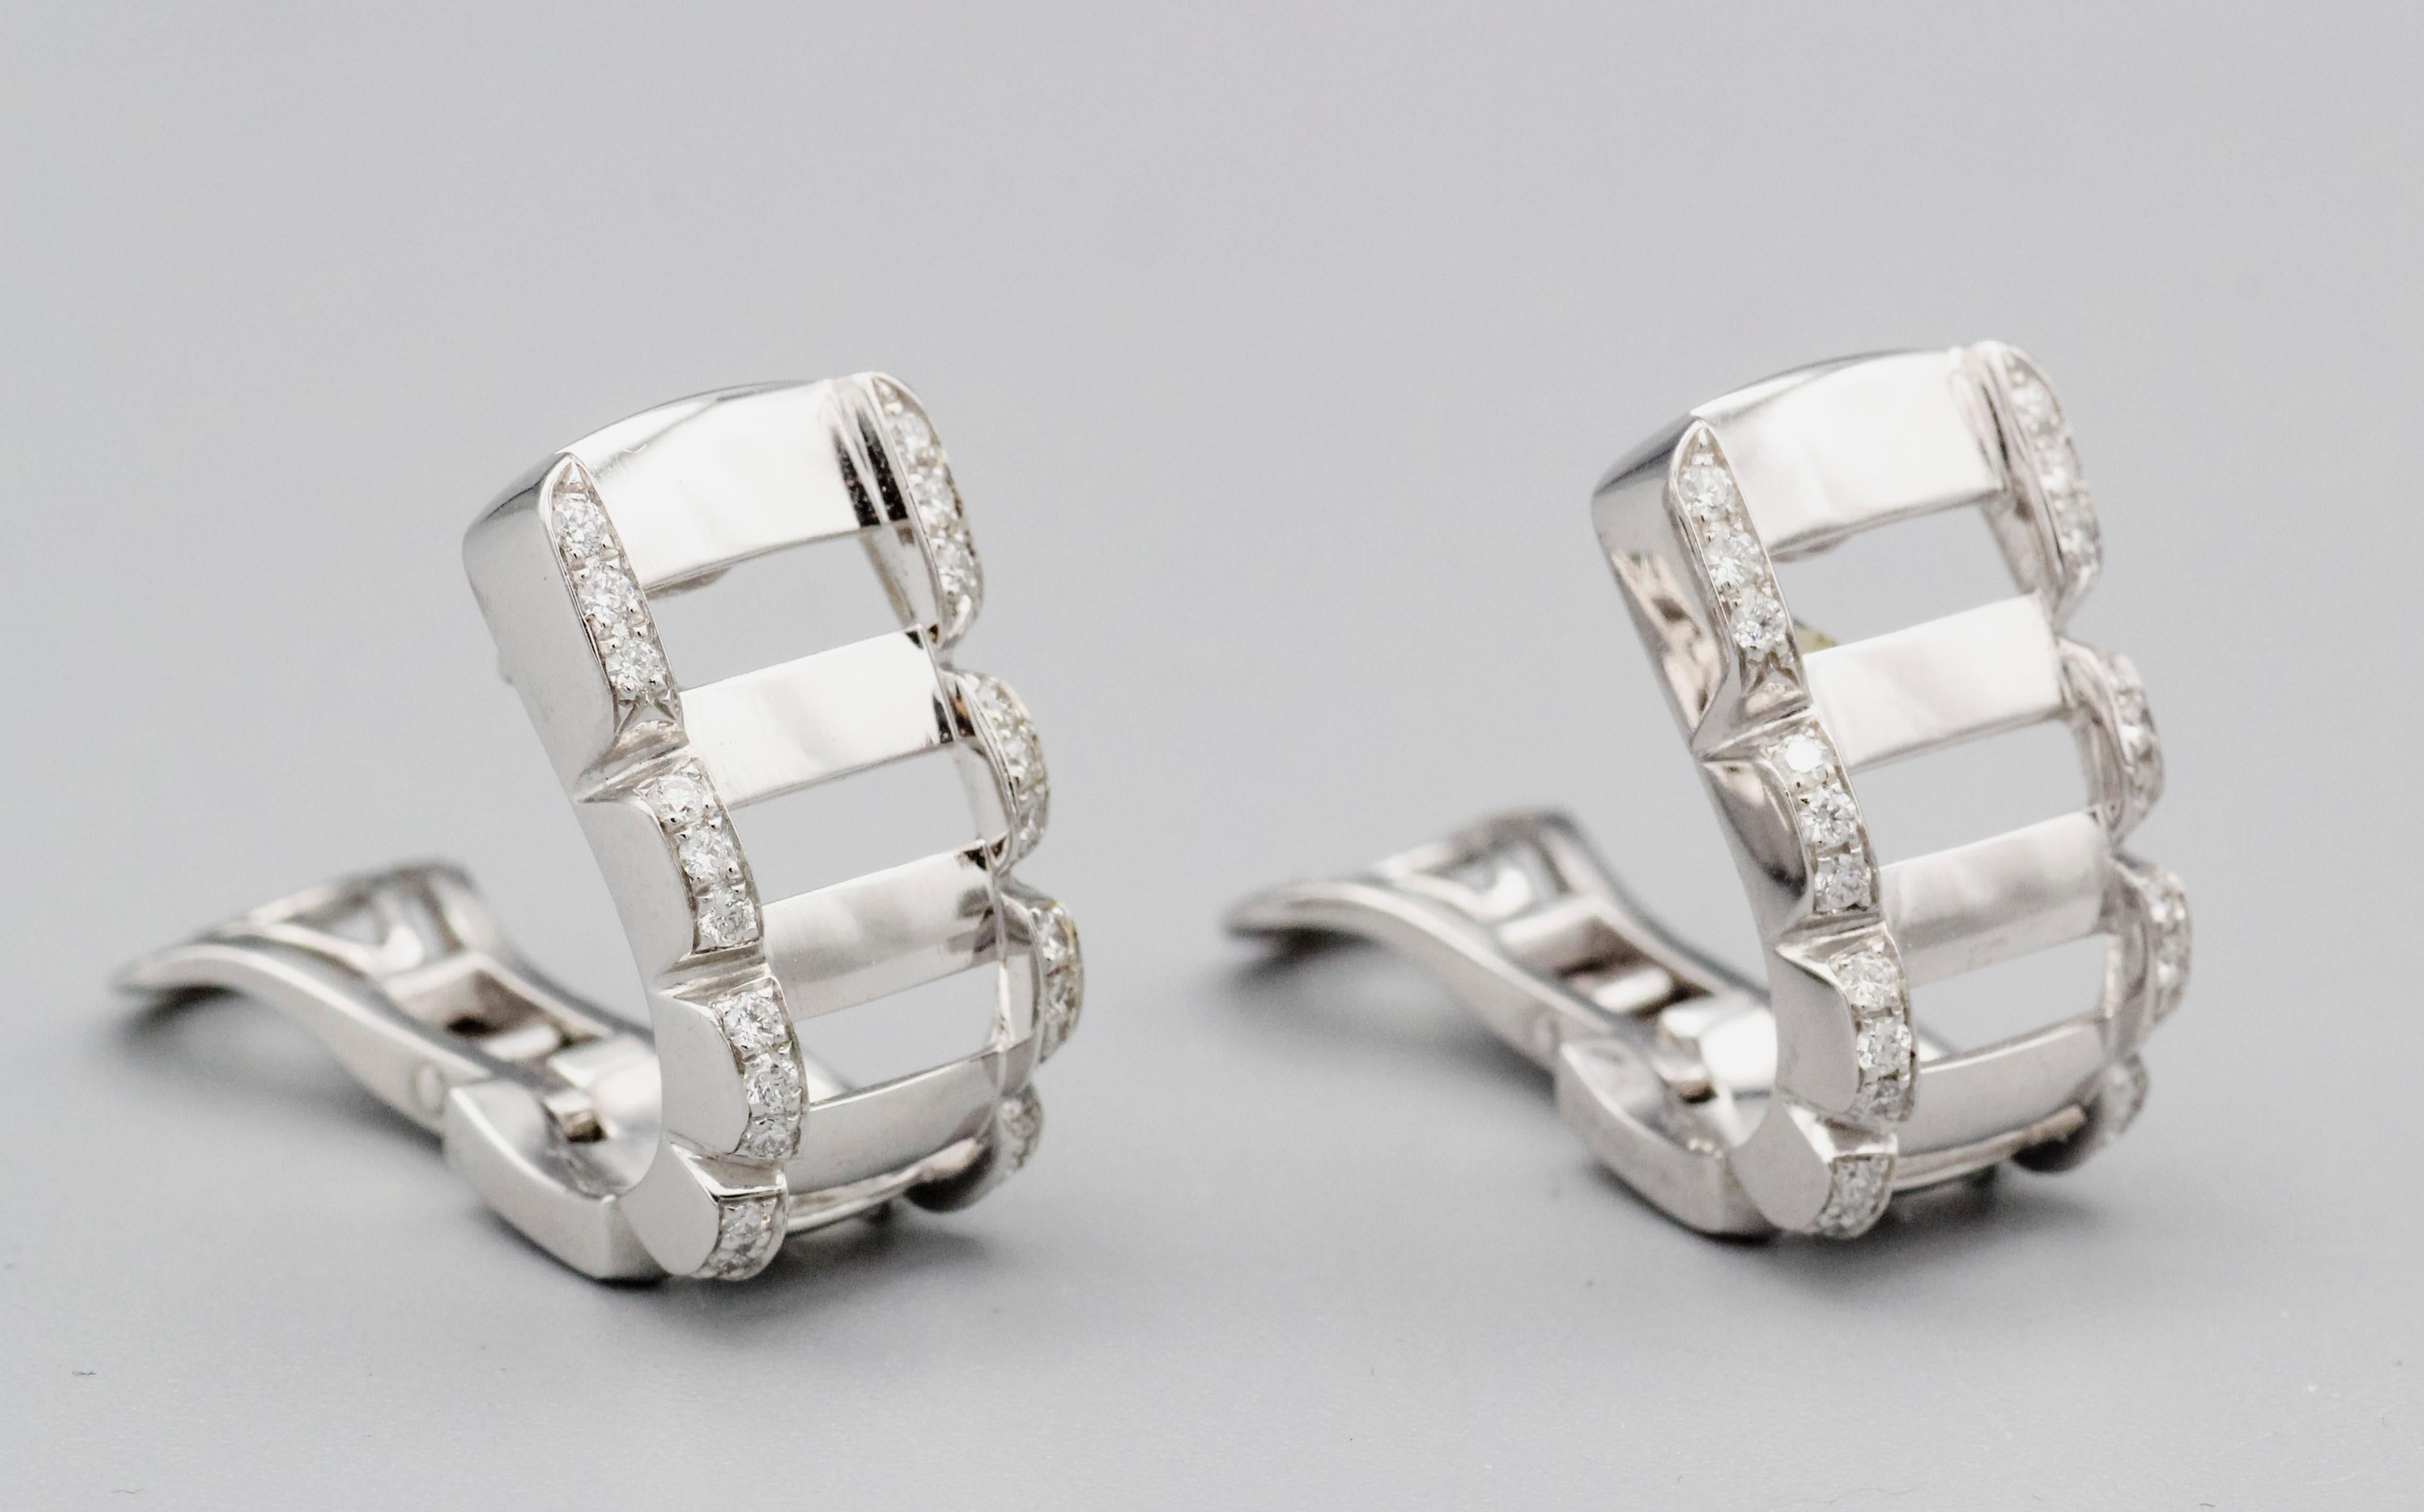 Elevate your elegance with the Patek Philippe Twenty-4 Diamond 18 Karat White Gold Hoop Earrings, a dazzling embodiment of luxury and sophistication. Crafted by the esteemed Swiss watchmaker Patek Philippe, these earrings are a stunning expression